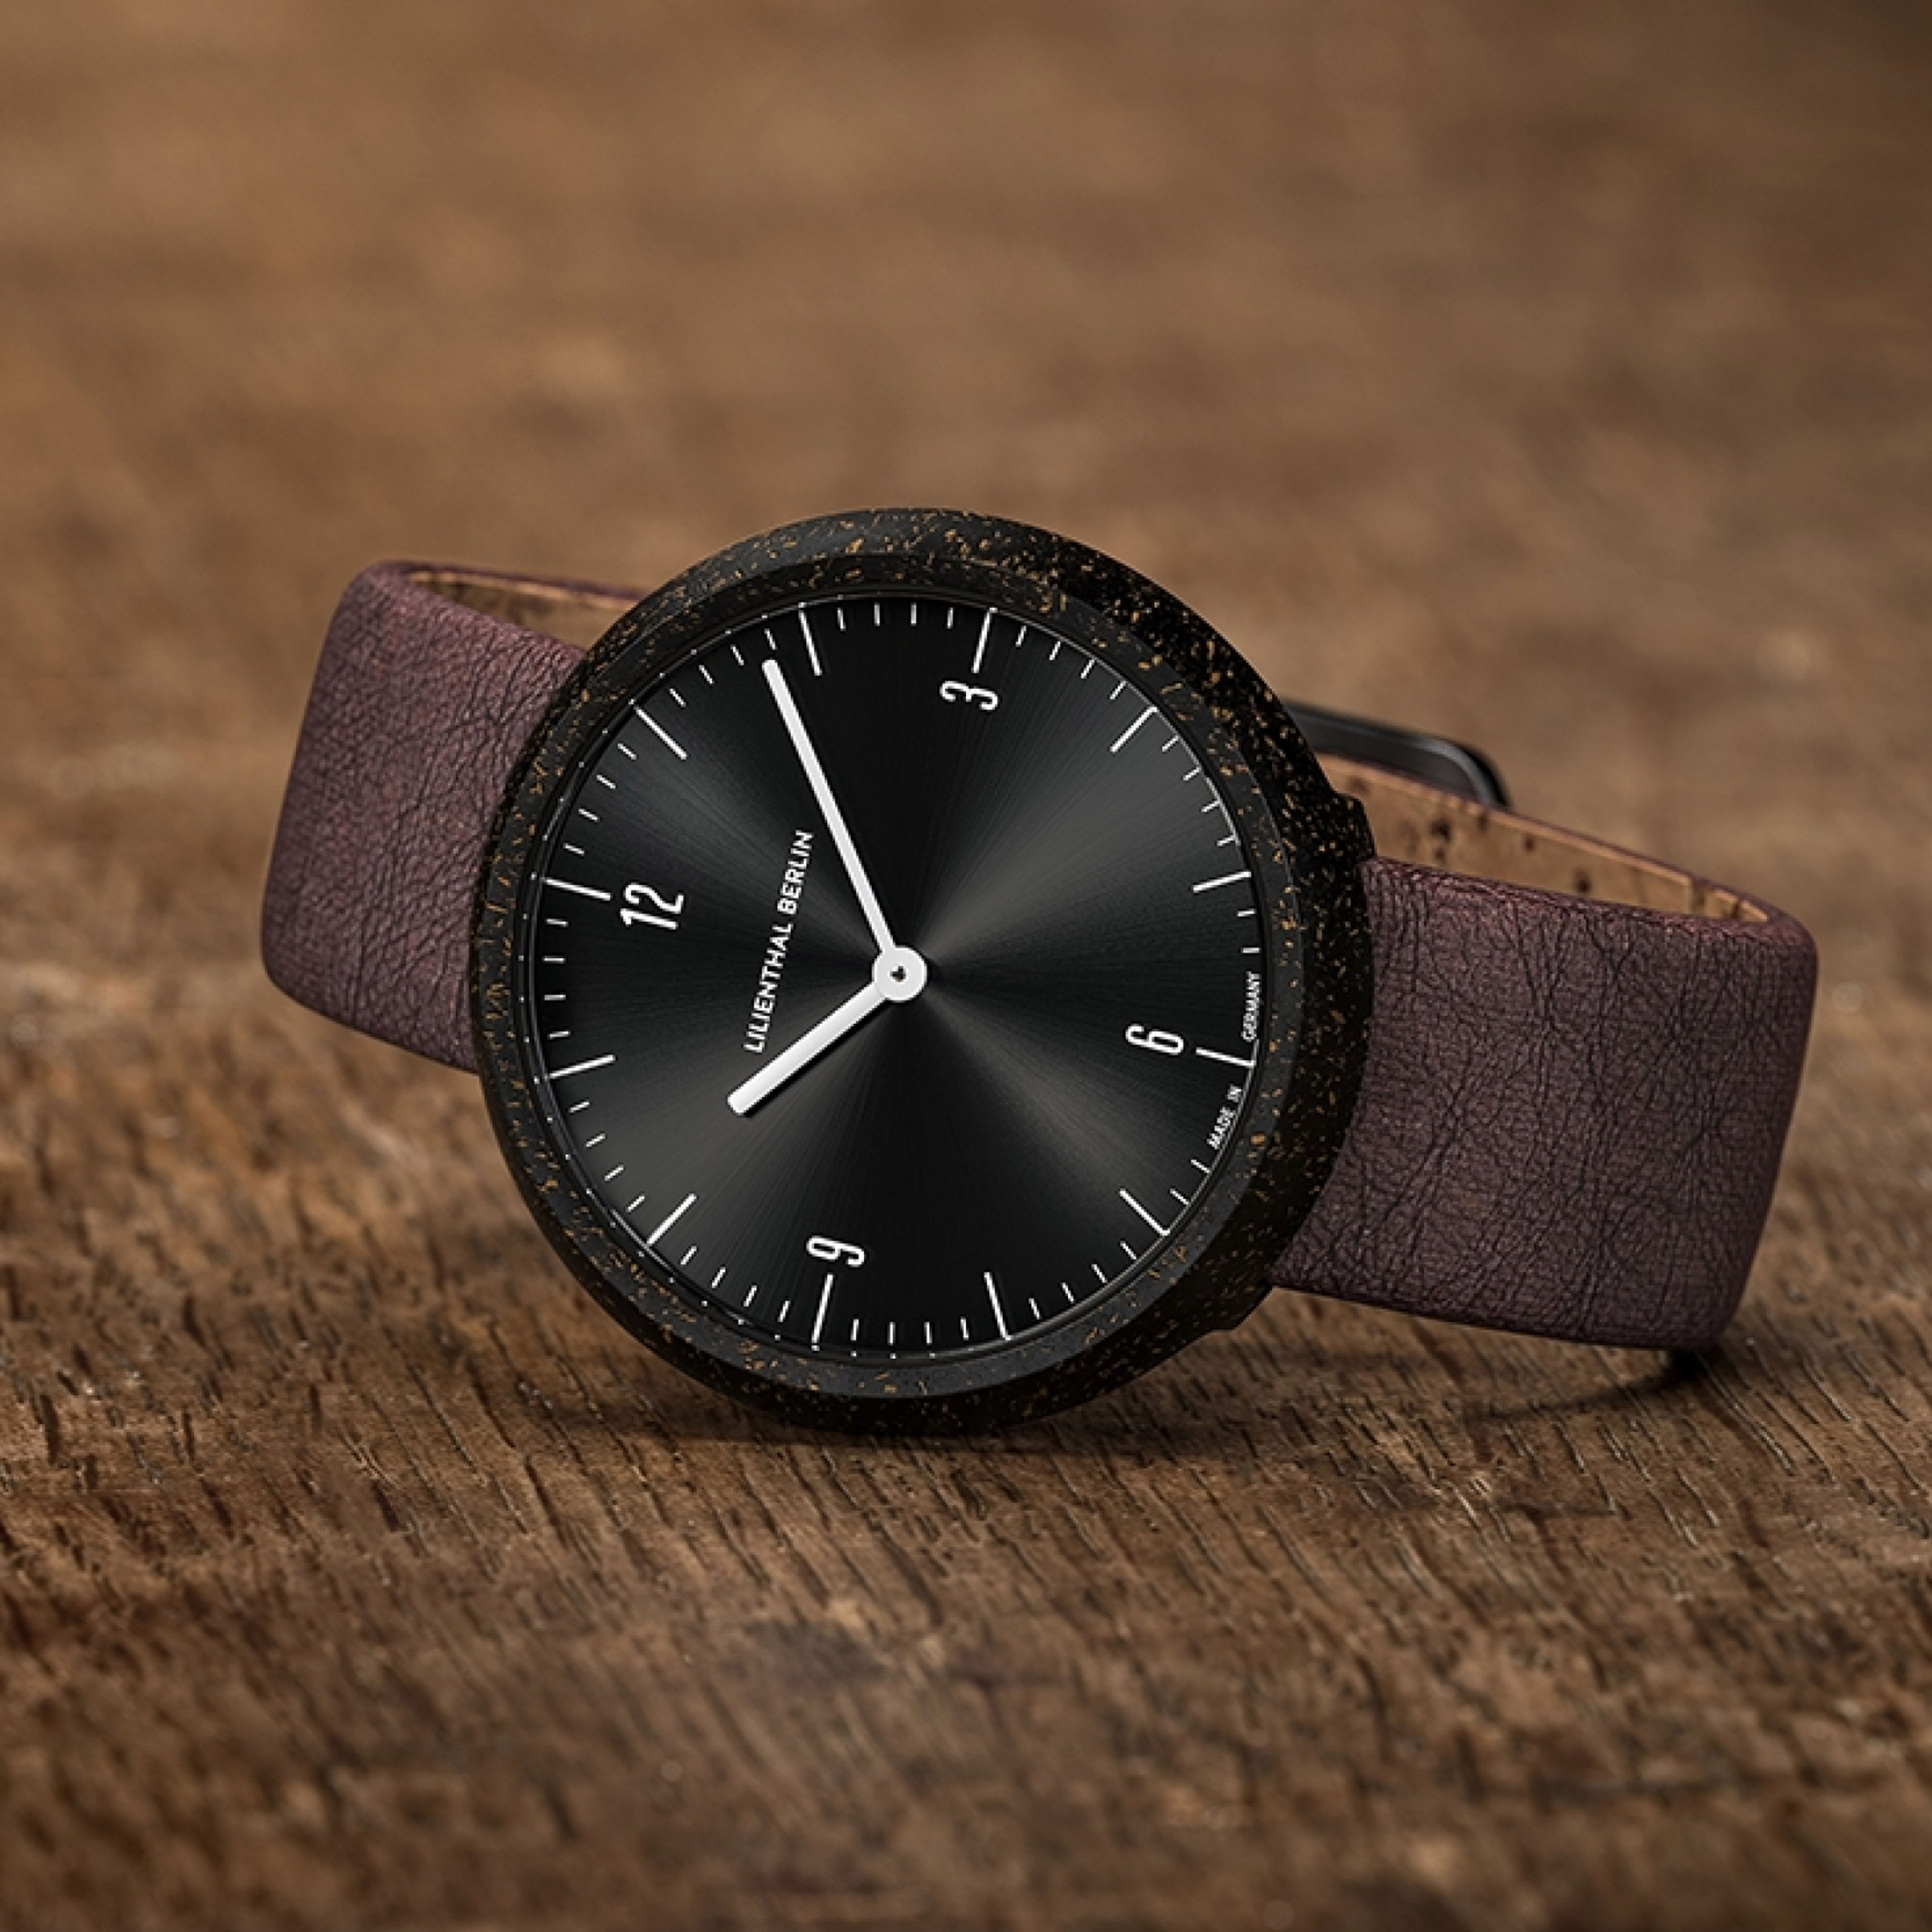 A brown watch with a design informed by coffee